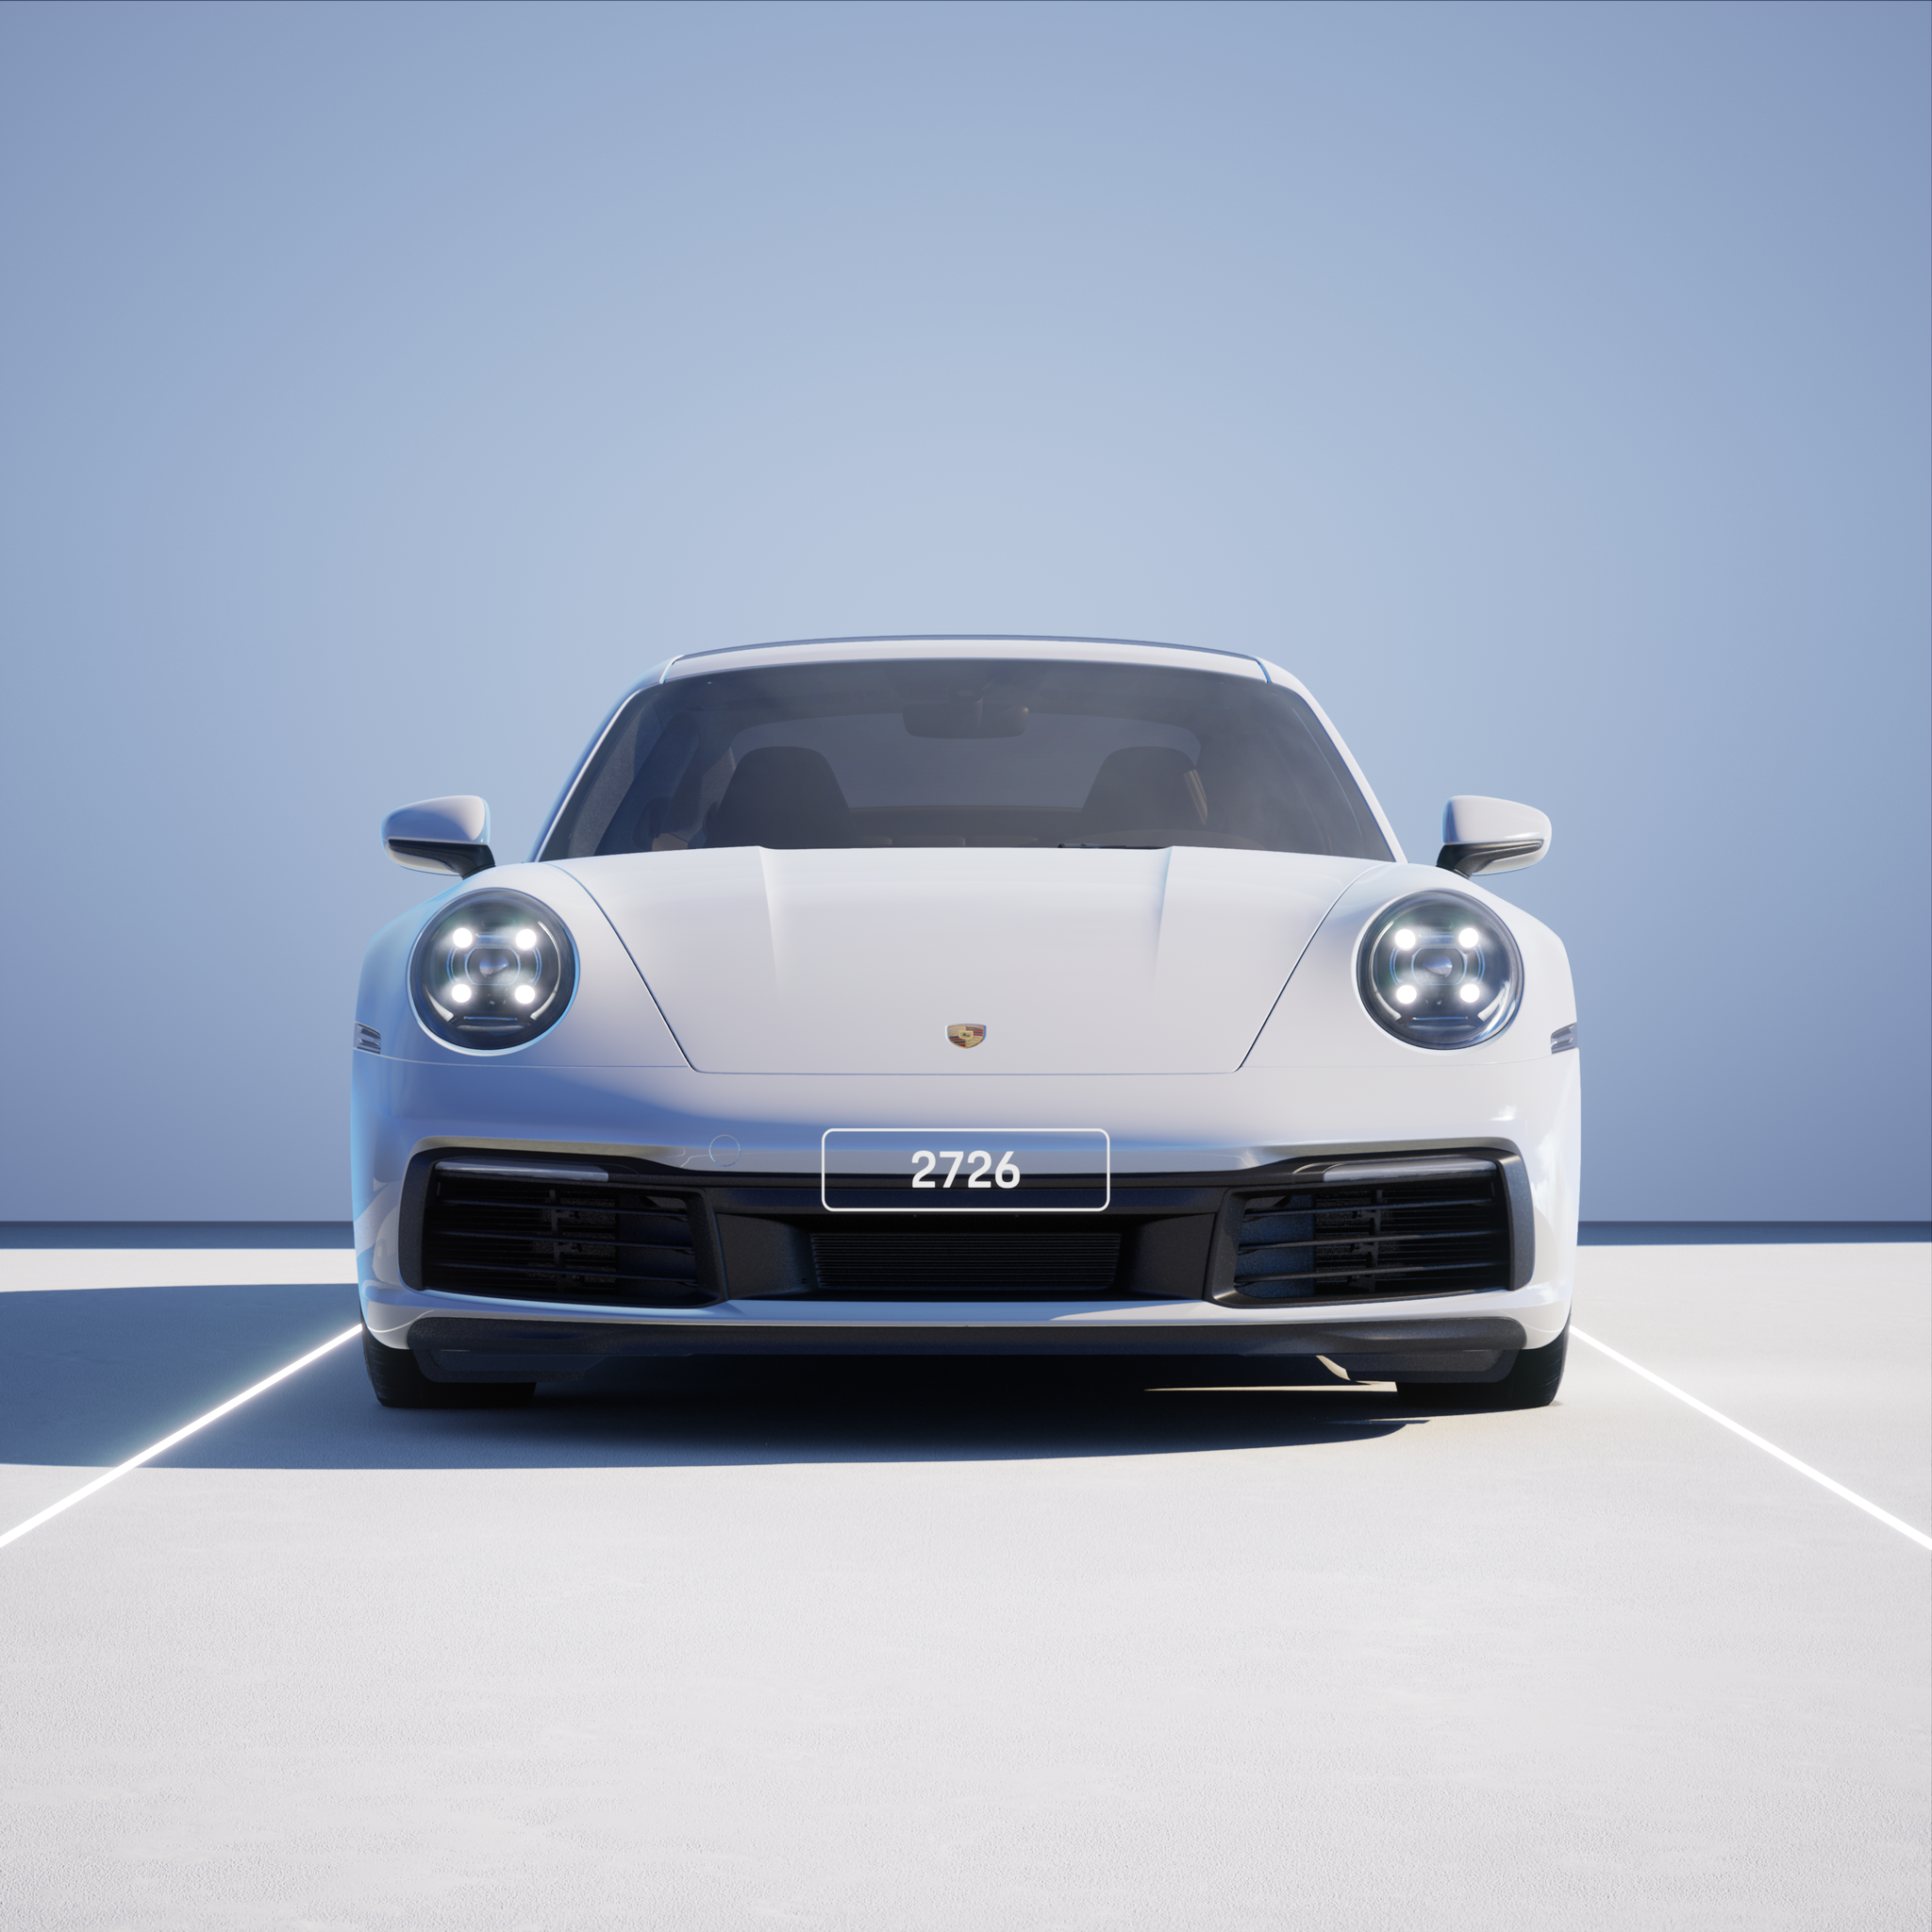 The PORSCHΞ 911 2726 image in phase